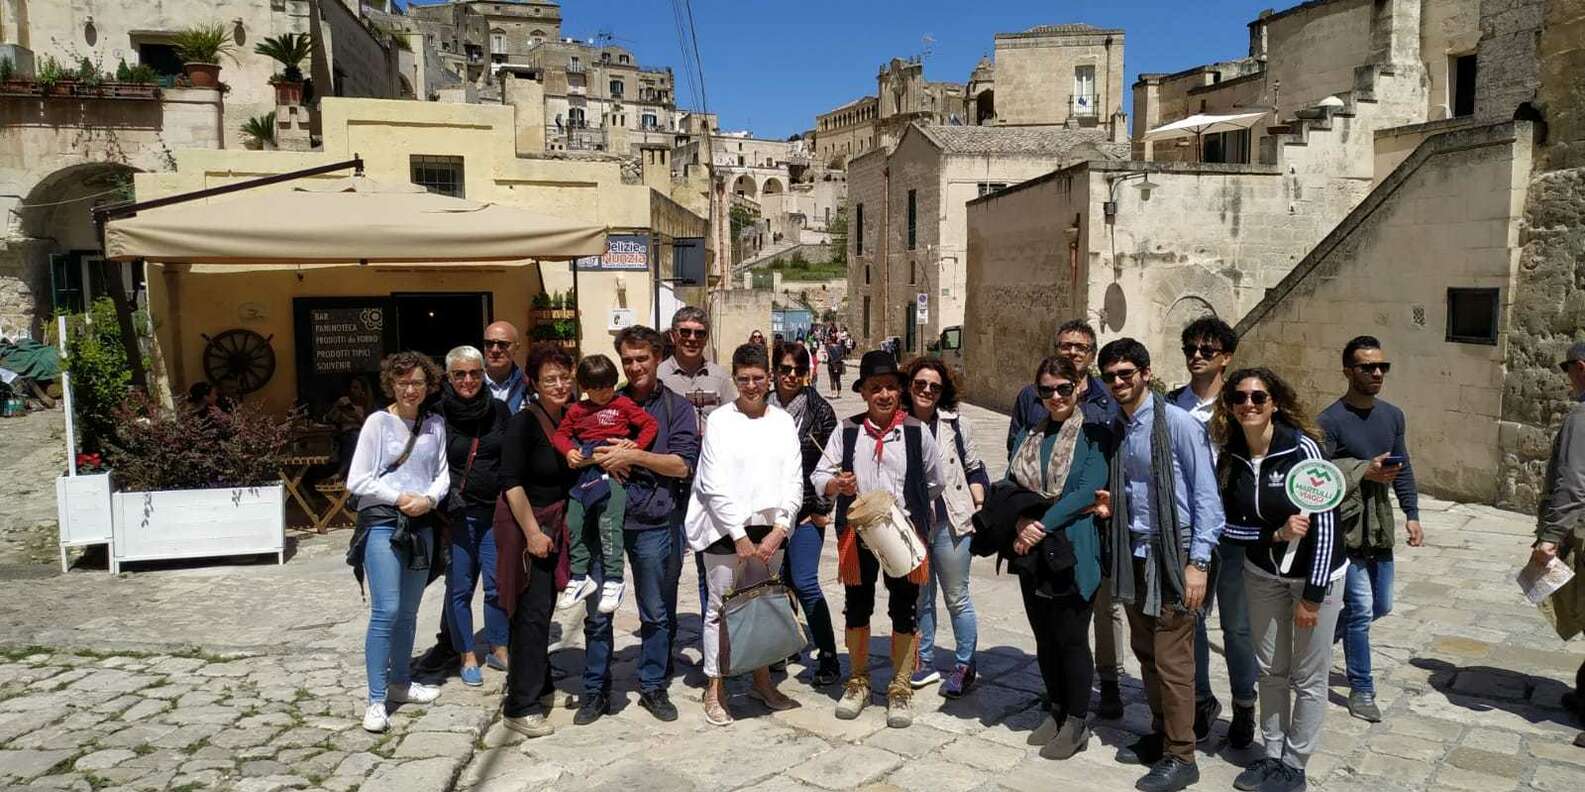 What to do in Matera